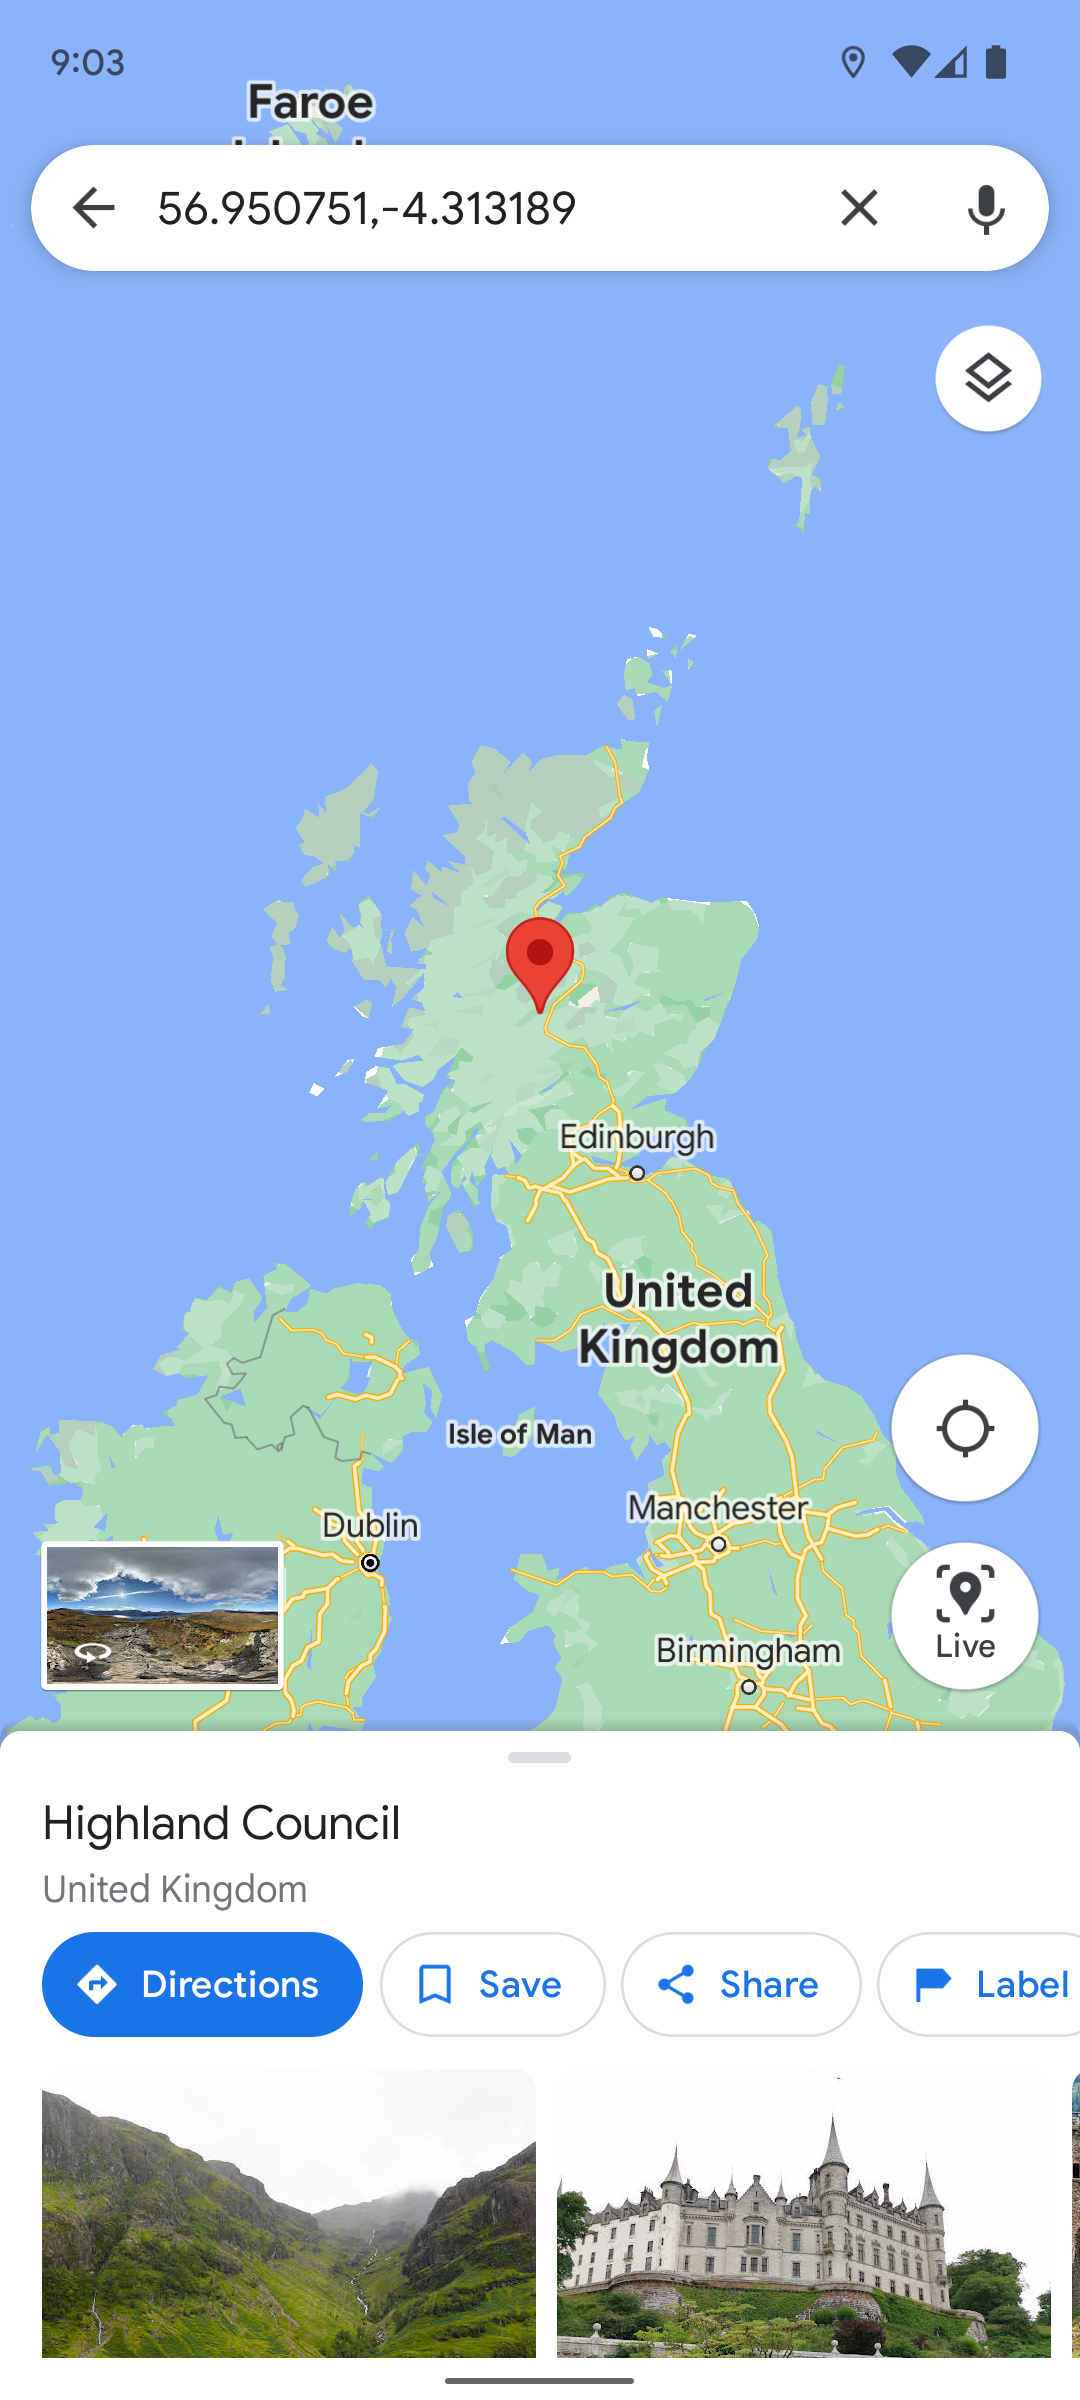 Screenshot shows a pin dropped on the map in the UK in the Google Maps app.